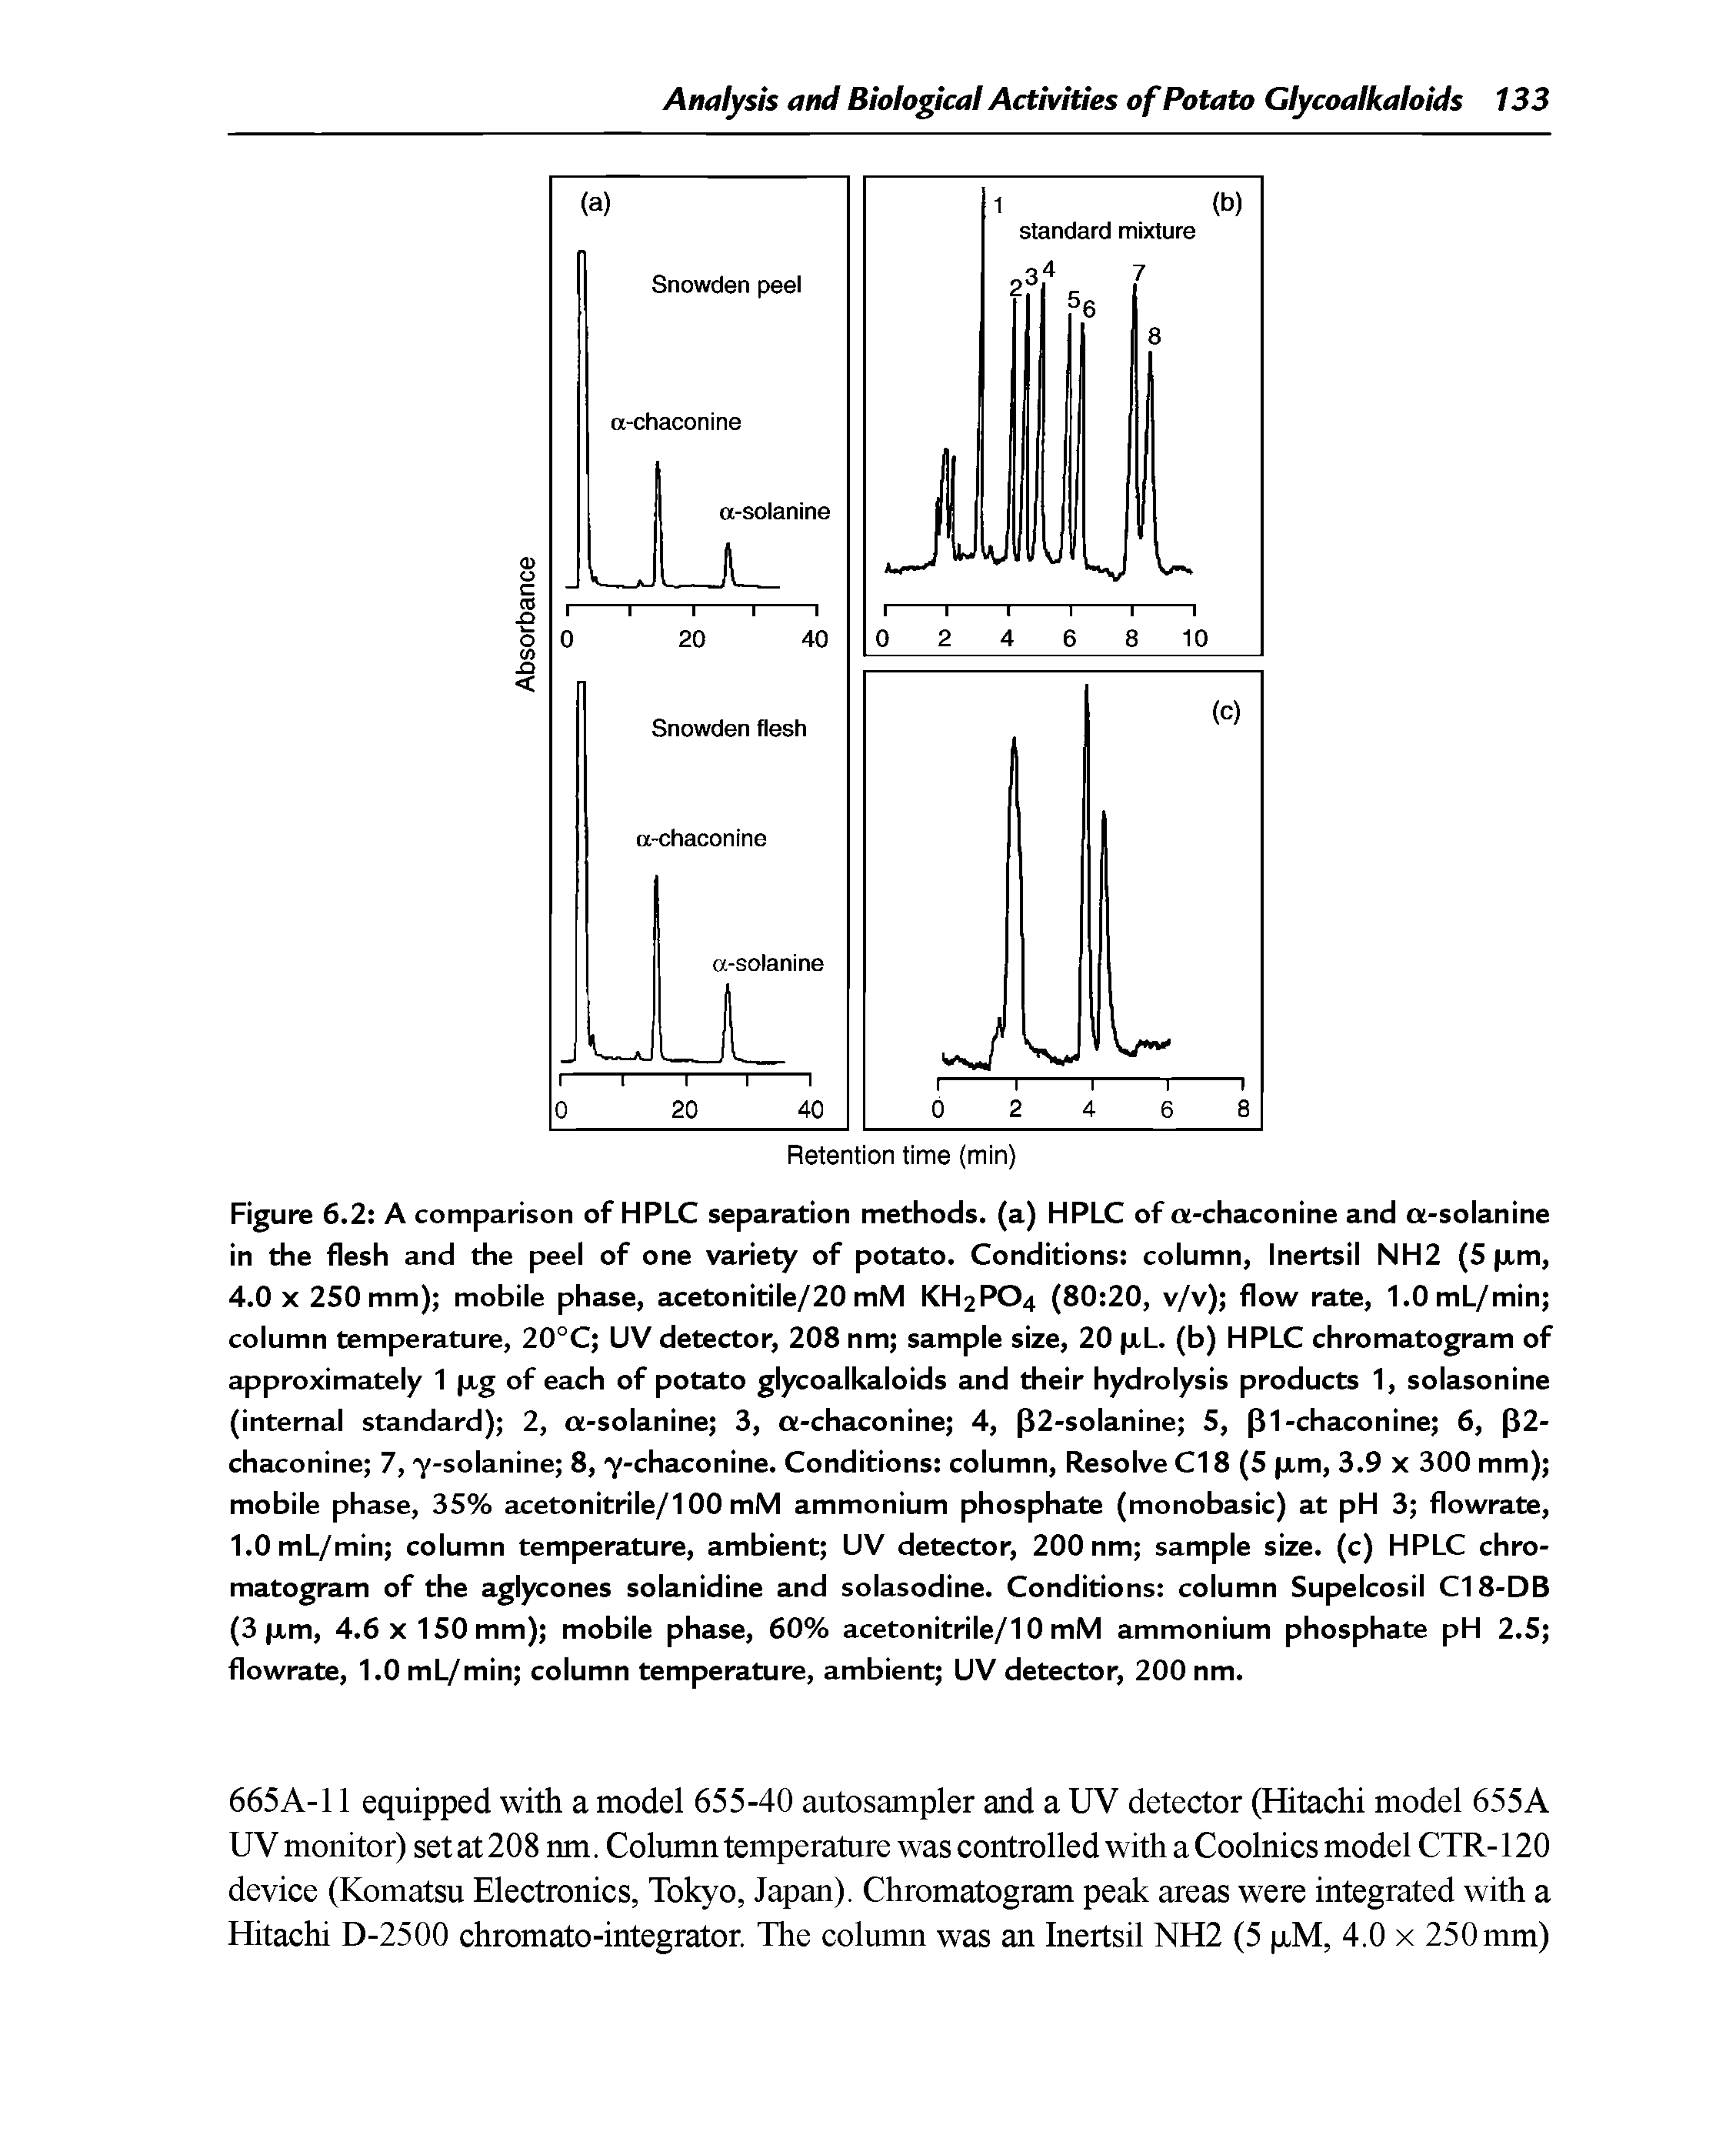 Figure 6.2 A comparison of HPLC separation methods, (a) HPLC of a-chaconine and a-solanine in the flesh and the peel of one variety of potato. Conditions column, Inertsil NH2 (5 xm, 4.0 X 250 mm) mobile phase, acetonitile/20 mM KH2PO4 (80 20, v/v) flow rate, I.OmL/min column temperature, 20°C UV detector, 208 nm sample size, 20 (xL. (b) HPLC chromatogram of approximately 1 xg of each of potato glycoalkaloids and their hydrolysis products 1, solasonine (internal standard) 2, a-solanine 3, a-chaconine 4, P2-solanine 5, pi-chaconine 6, (32-chaconine 7, y-solanine 8, y-chaconine. Conditions column. Resolve Cl 8 (5 (xm, 3.9 x 300 mm) mobile phase, 35% acetonitrile/100 mM ammonium phosphate (monobasic) at pH 3 flowrate, I.OmL/min column temperature, ambient UV detector, 200 nm sample size, (c) HPLC chromatogram of the aglycones solanidine and solasodine. Conditions column Supelcosil C18-DB (3 (xm, 4.6x150 mm) mobile phase, 60% acetonitrile/10 mM ammonium phosphate pH 2.5 flowrate, 1.0 mL/min column temperature, ambient UV detector, 200 nm.